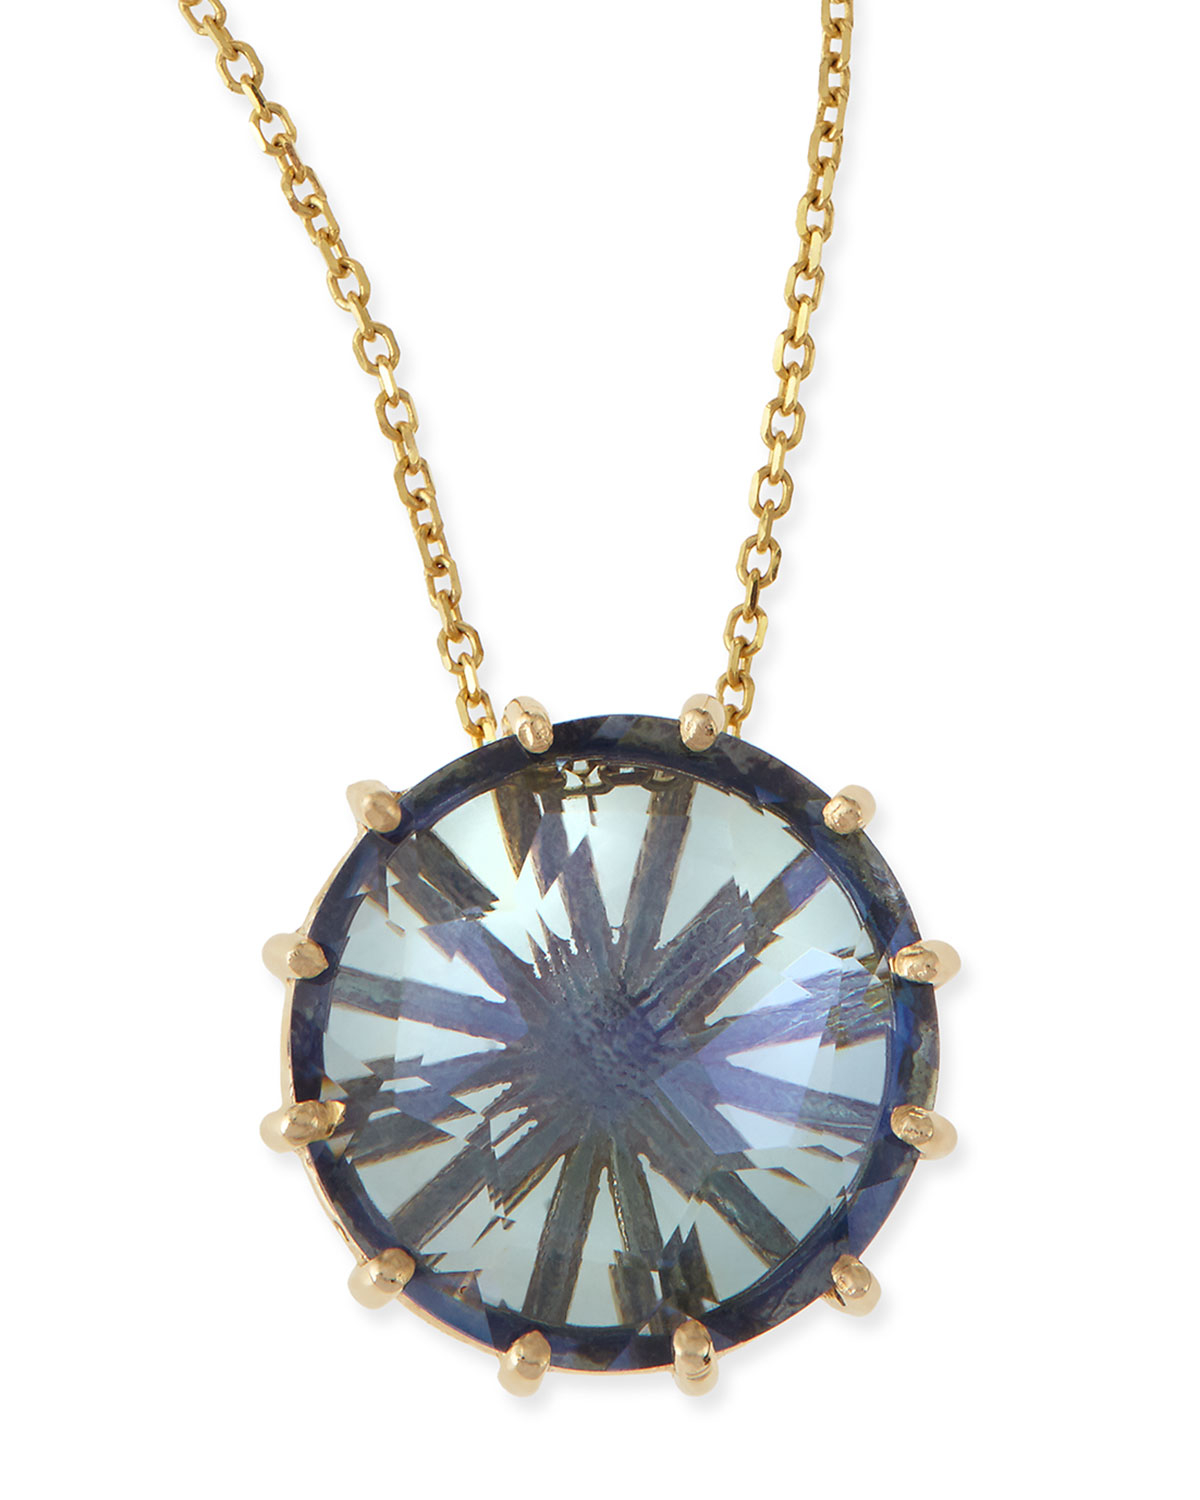 Lyst - Kalan By Suzanne Kalan 12mm Round Blue Topaz Pendant Necklace in ...